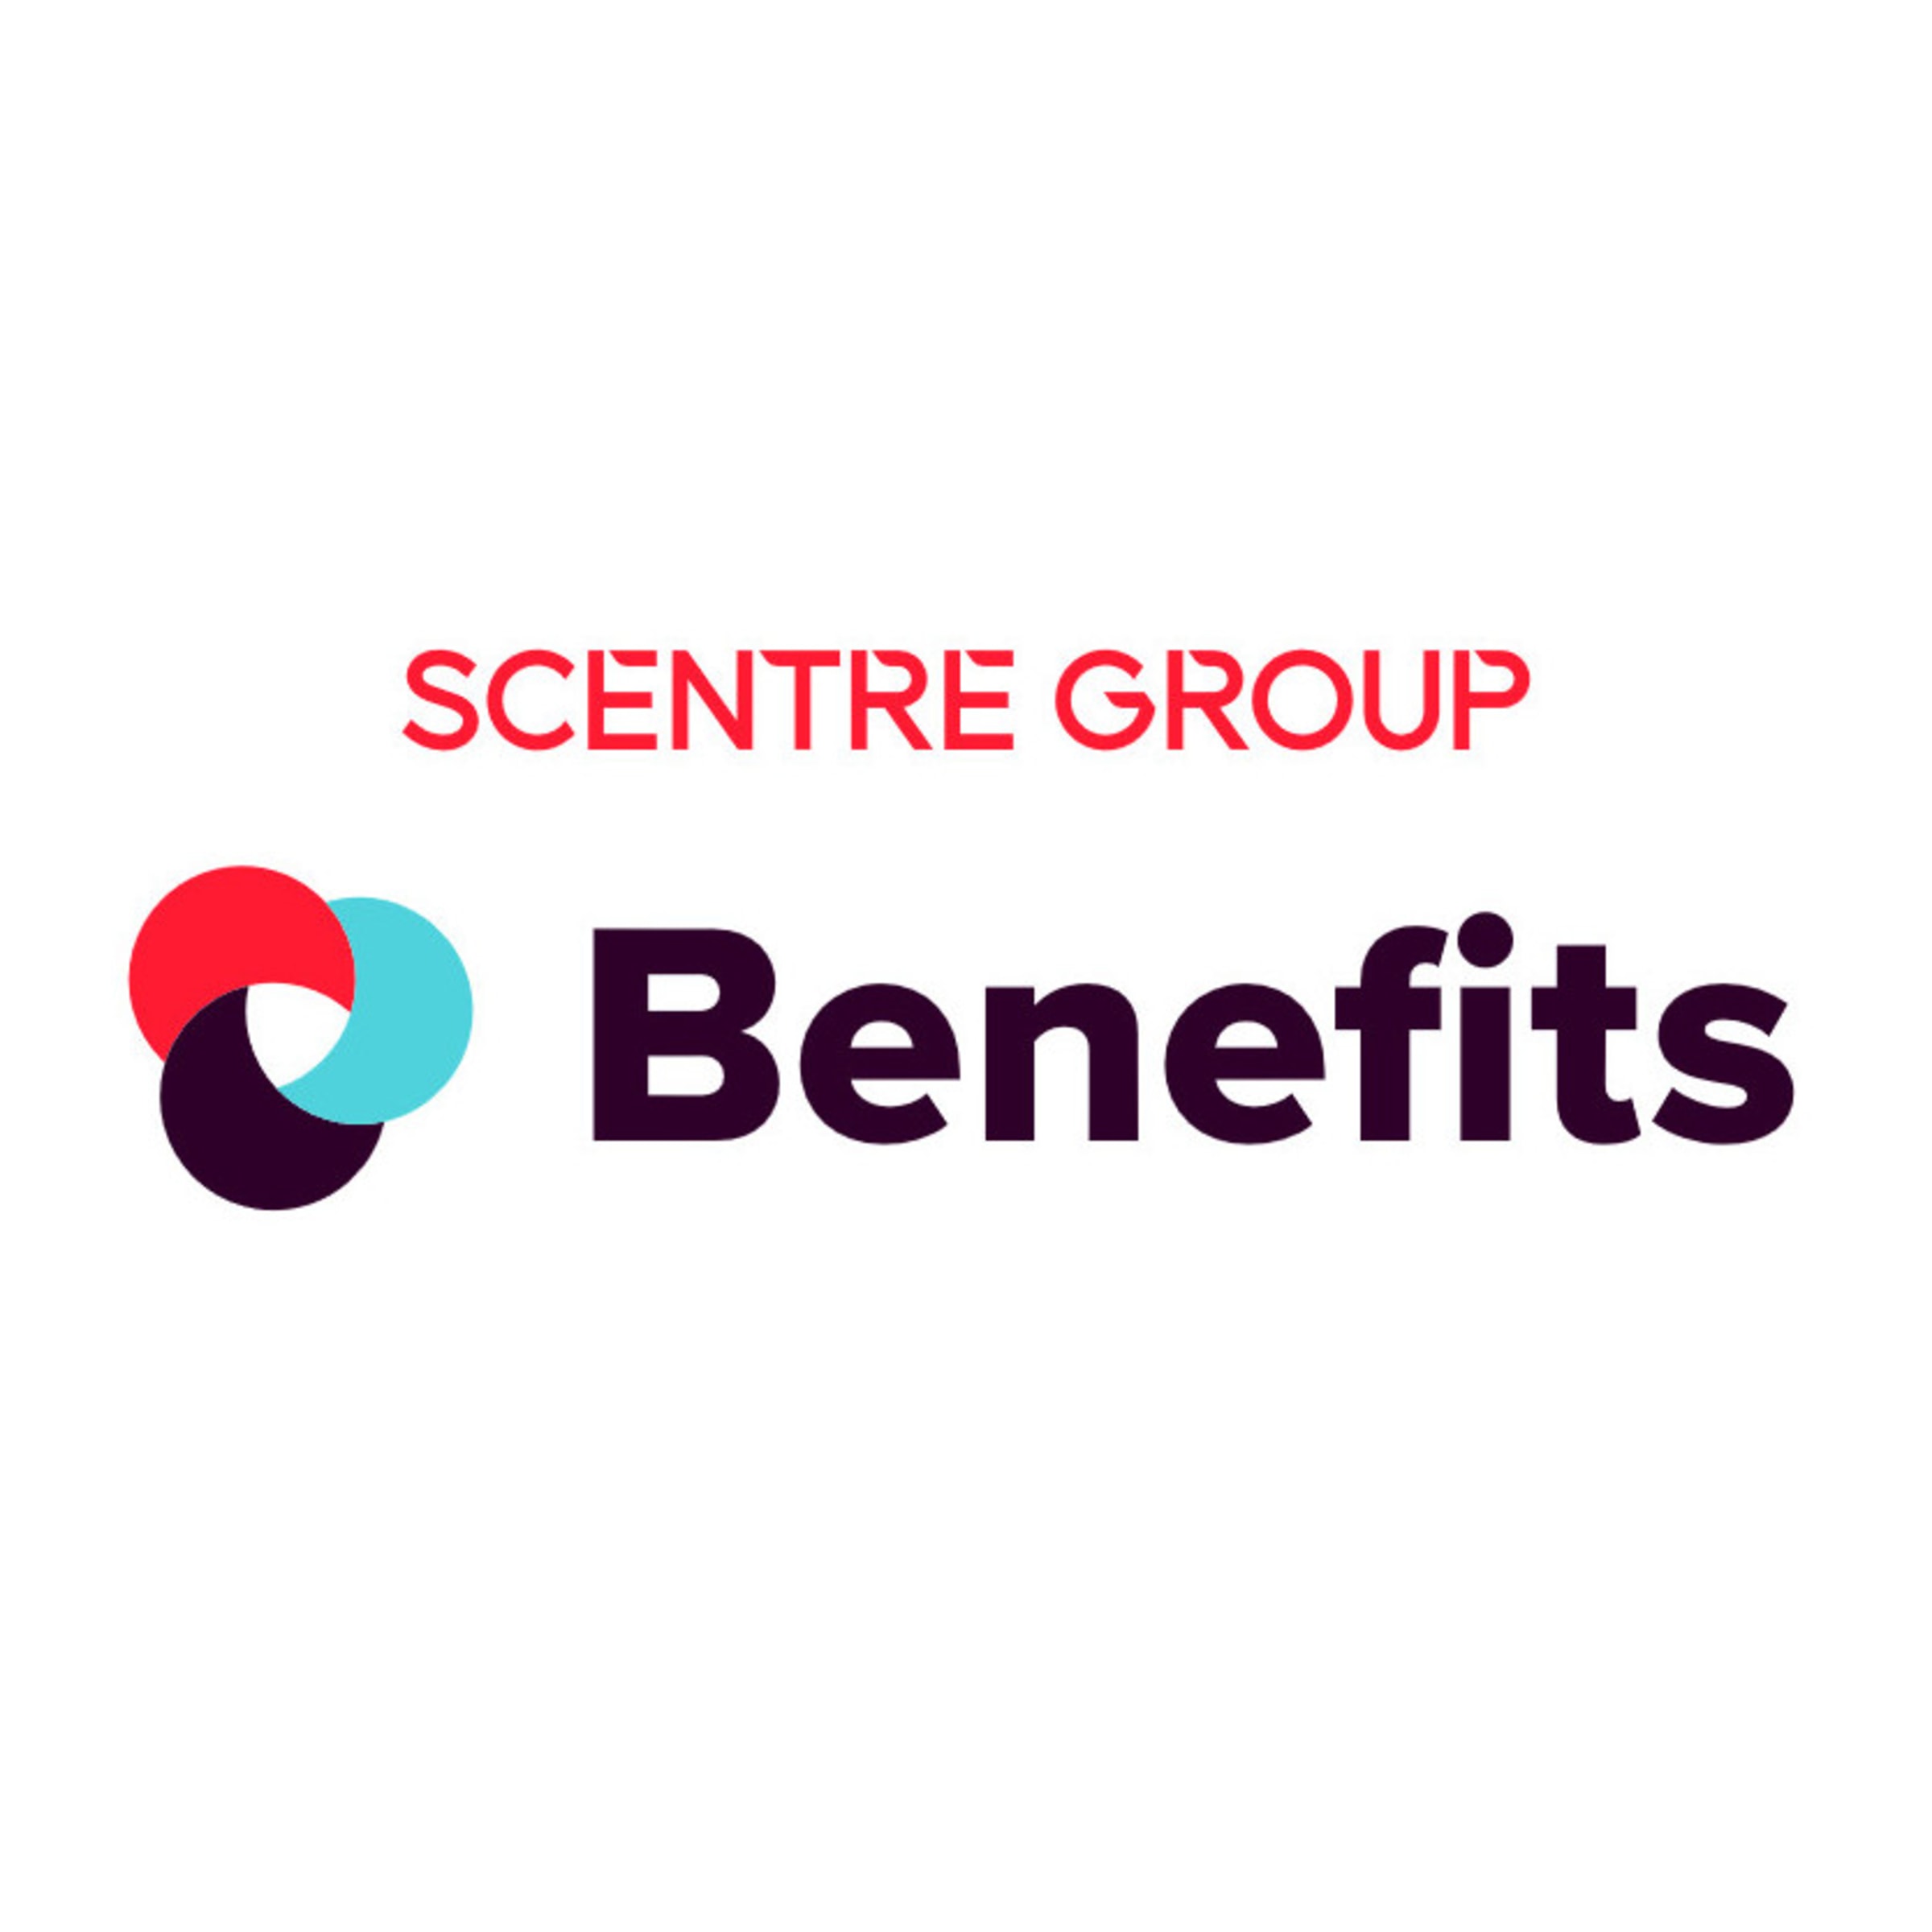 At Scentre Group our benefits are designed to help you thrive.